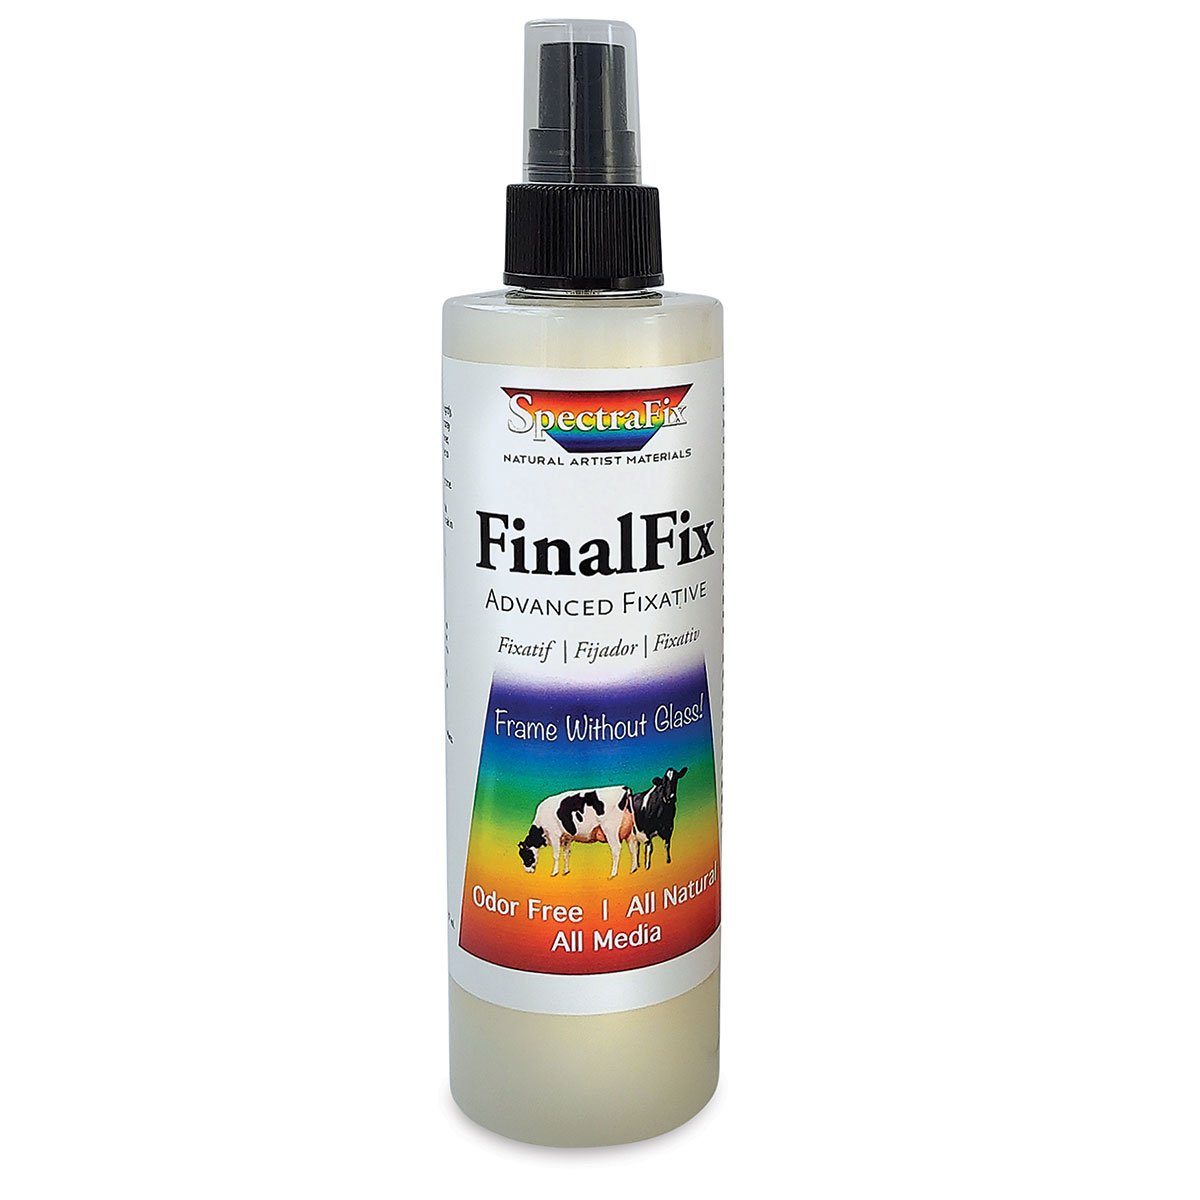 How to make fixative spray at home 